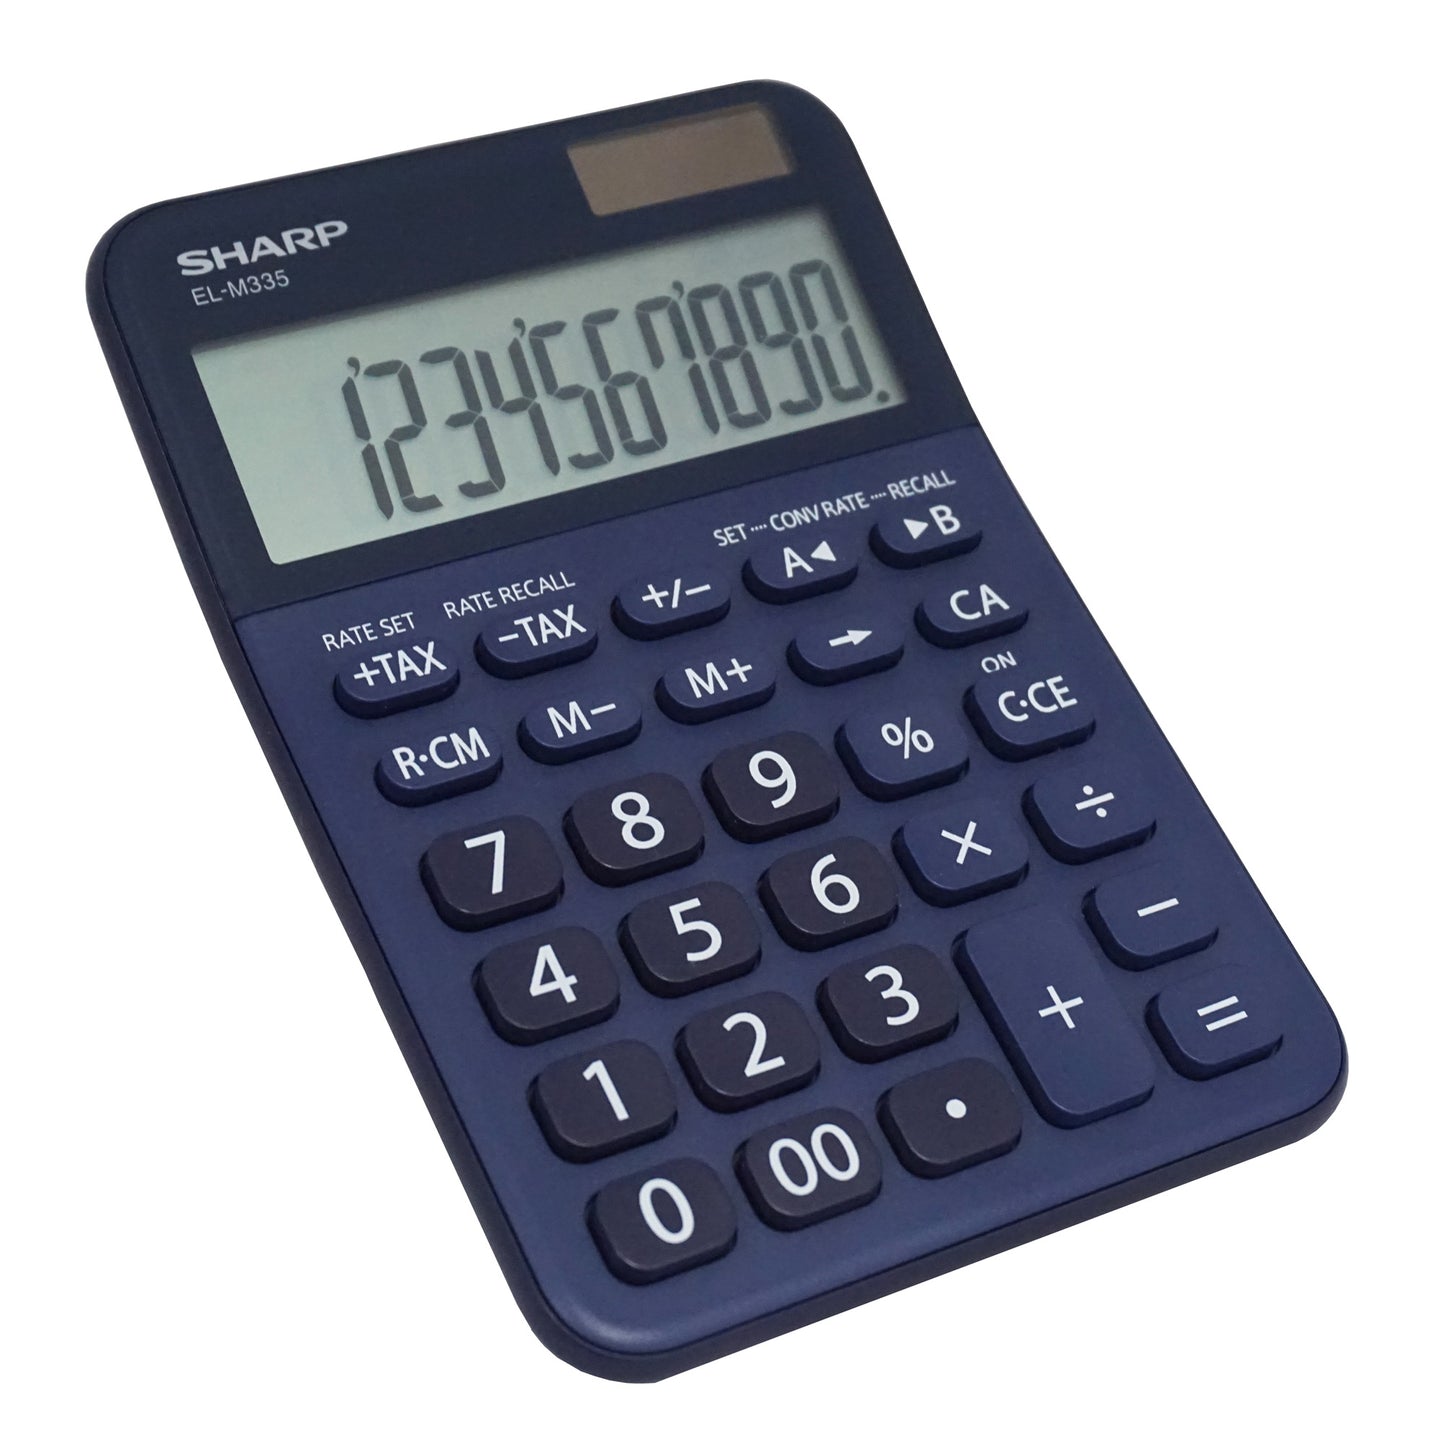 blue desktop calculator with extra large display on white background